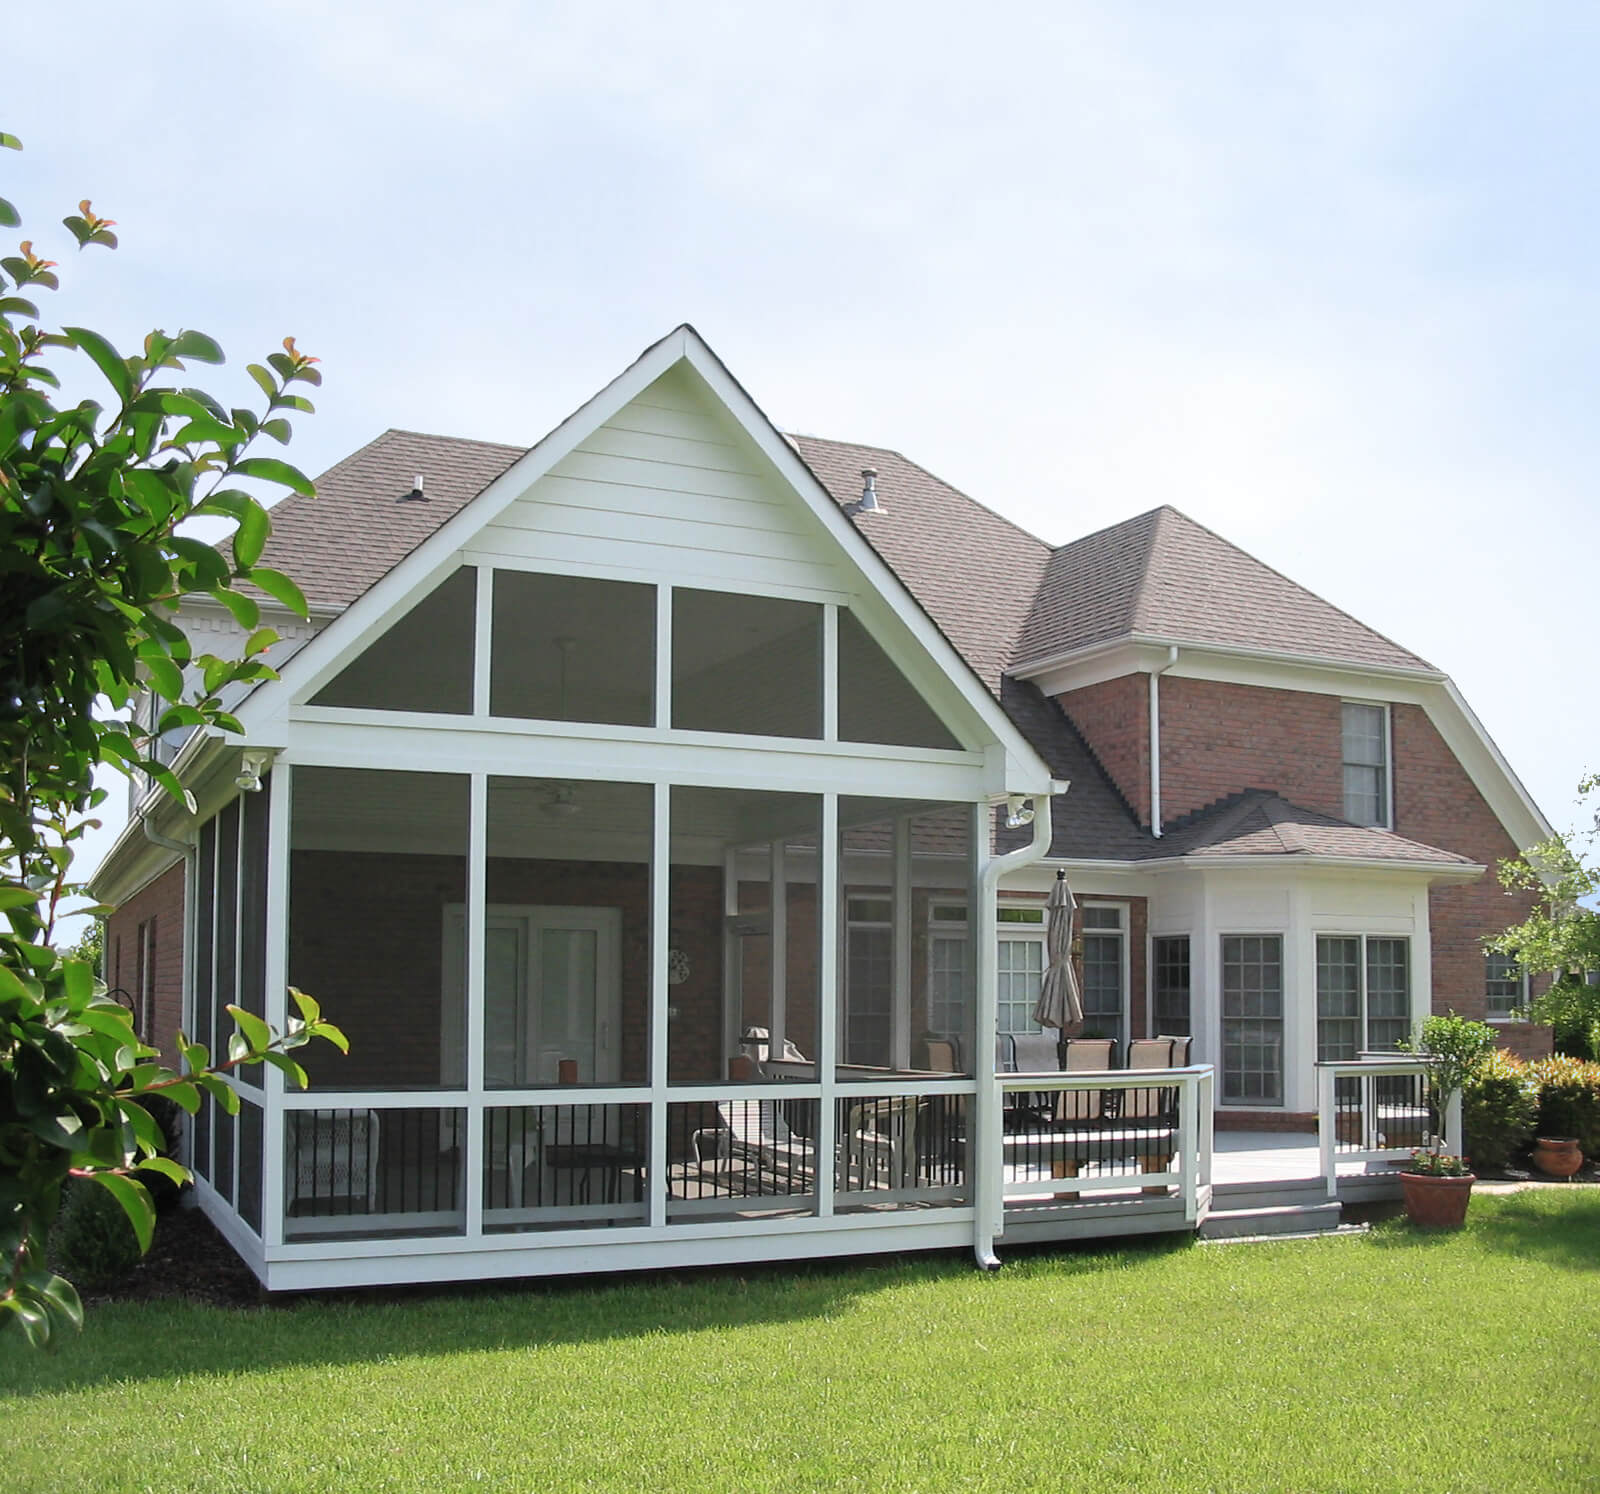 Exterior view of screened porch